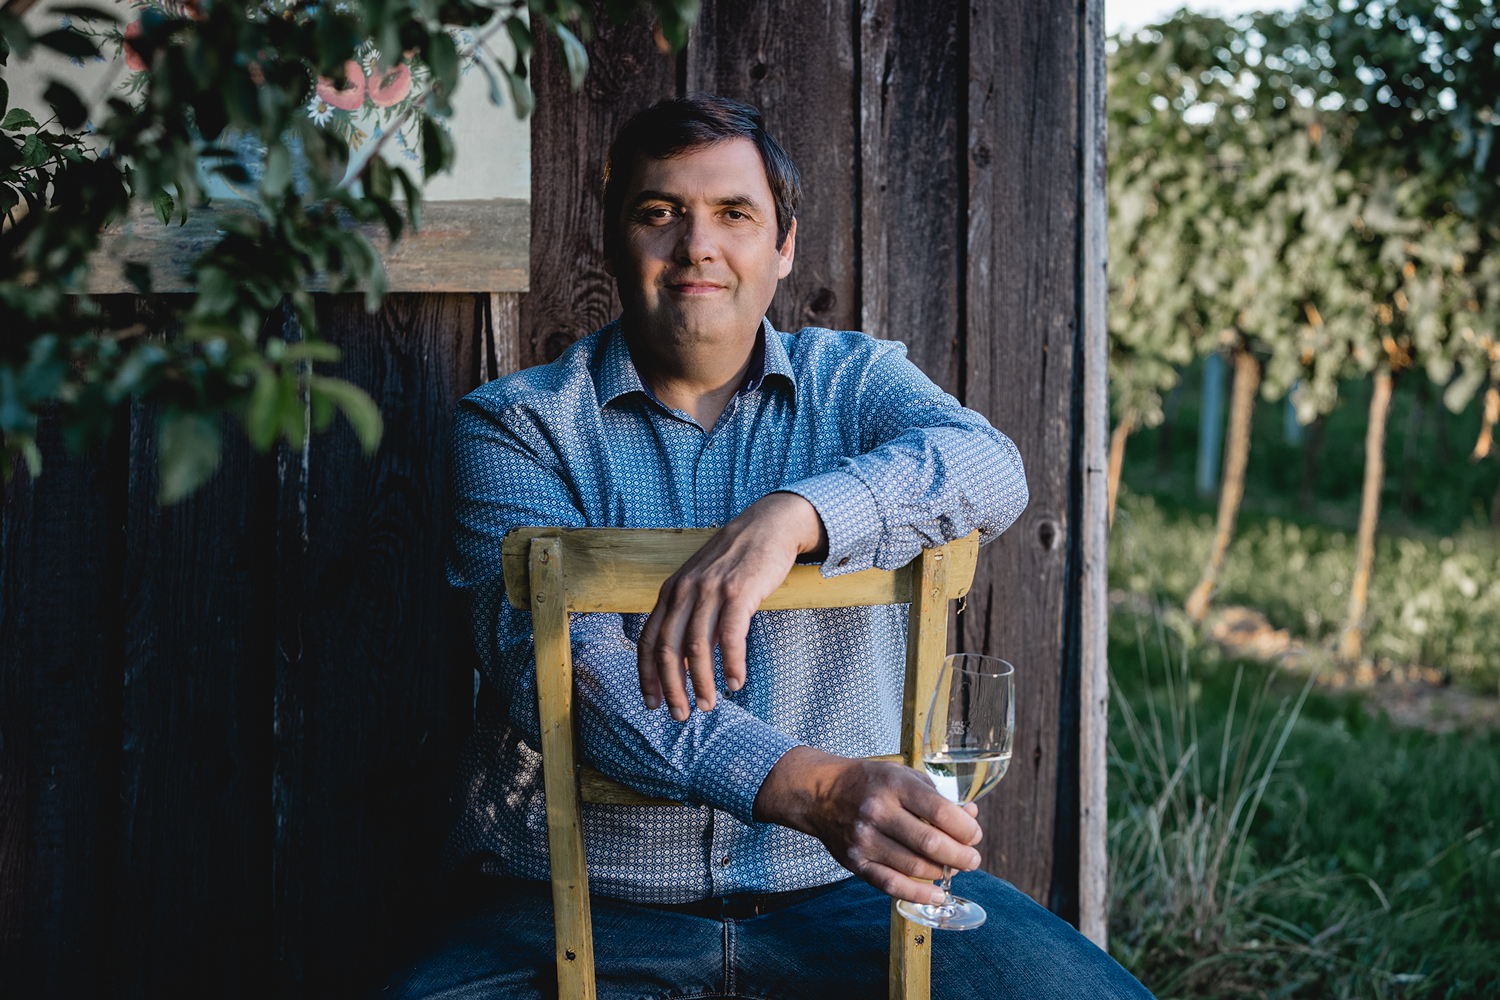 A man sits on a chair holding a wine glass